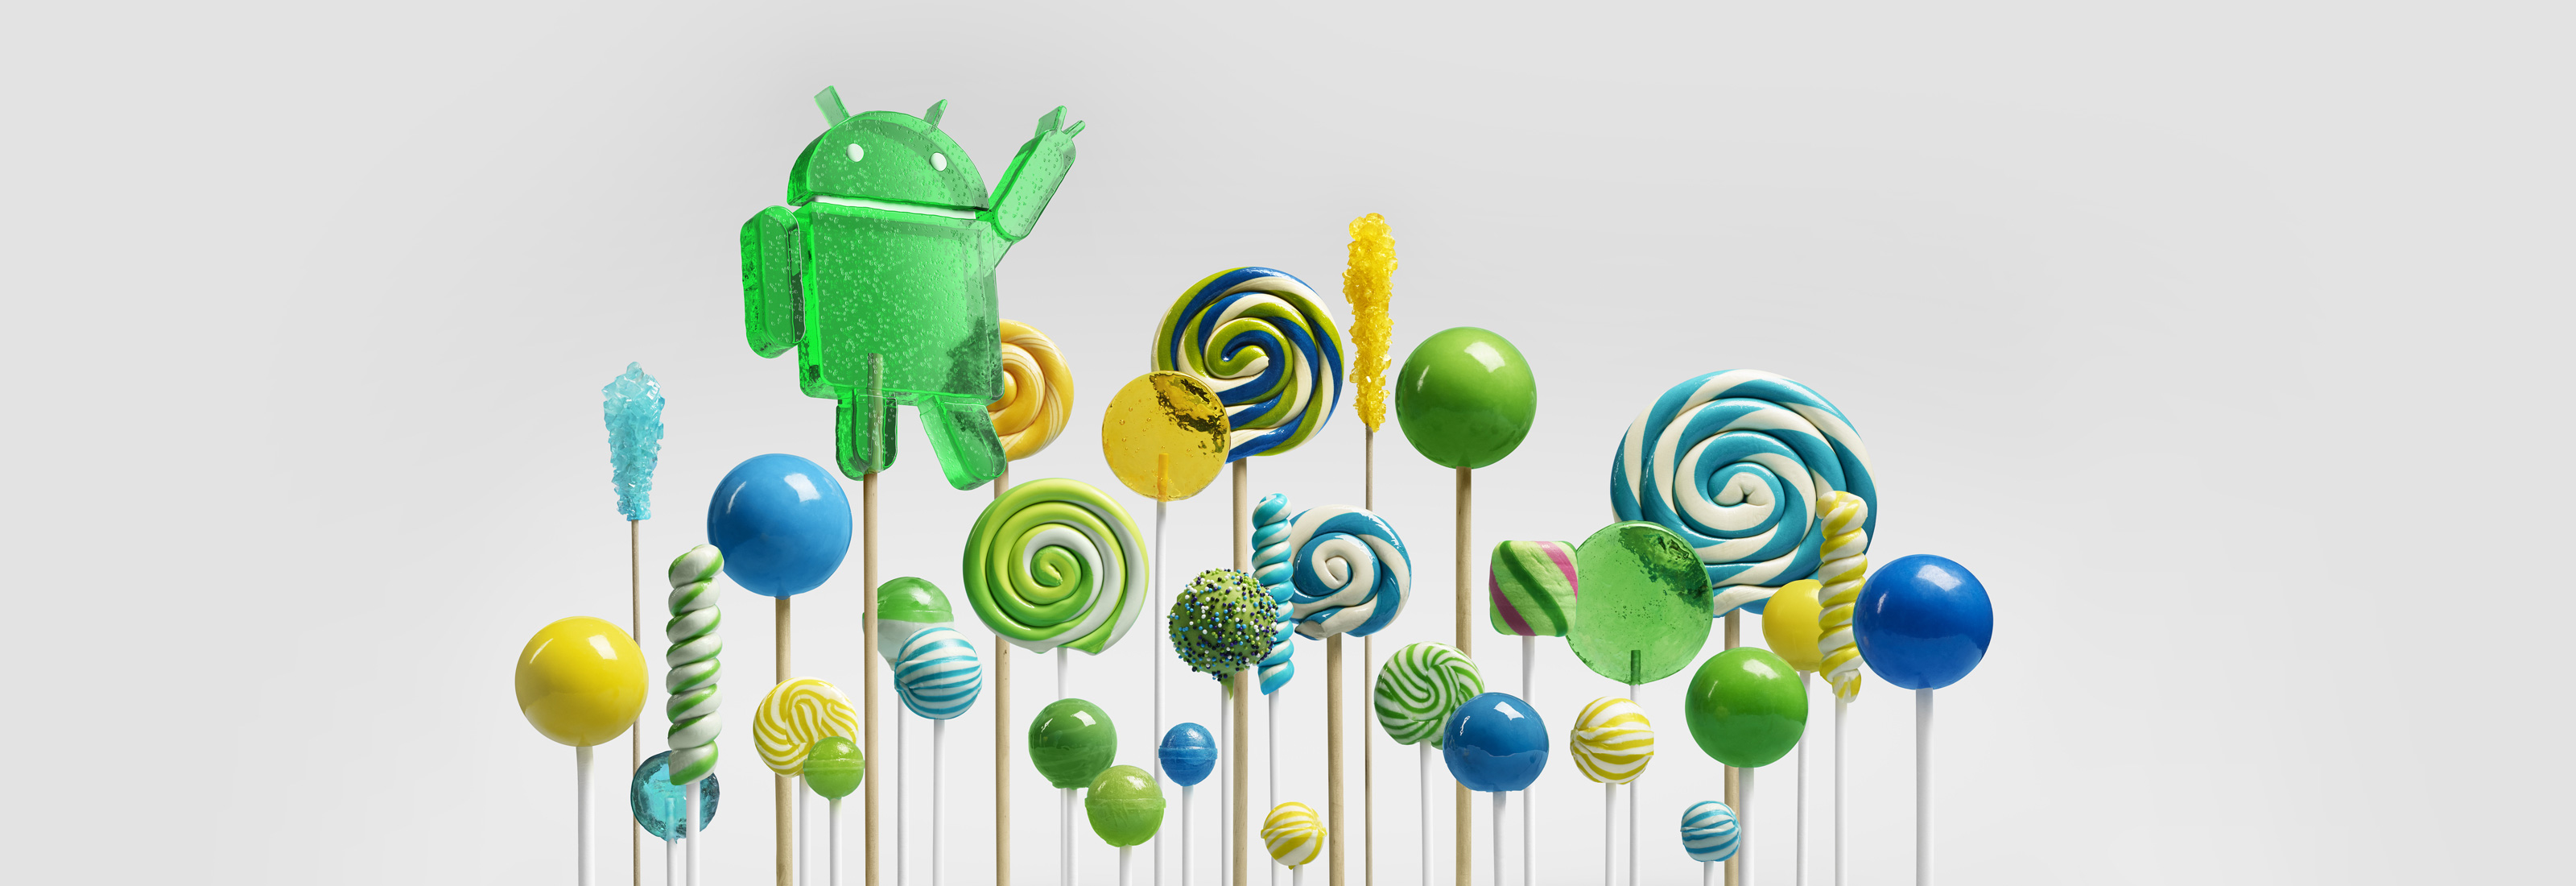 Android Everywhere: Lollipop makes Google’s case for unity